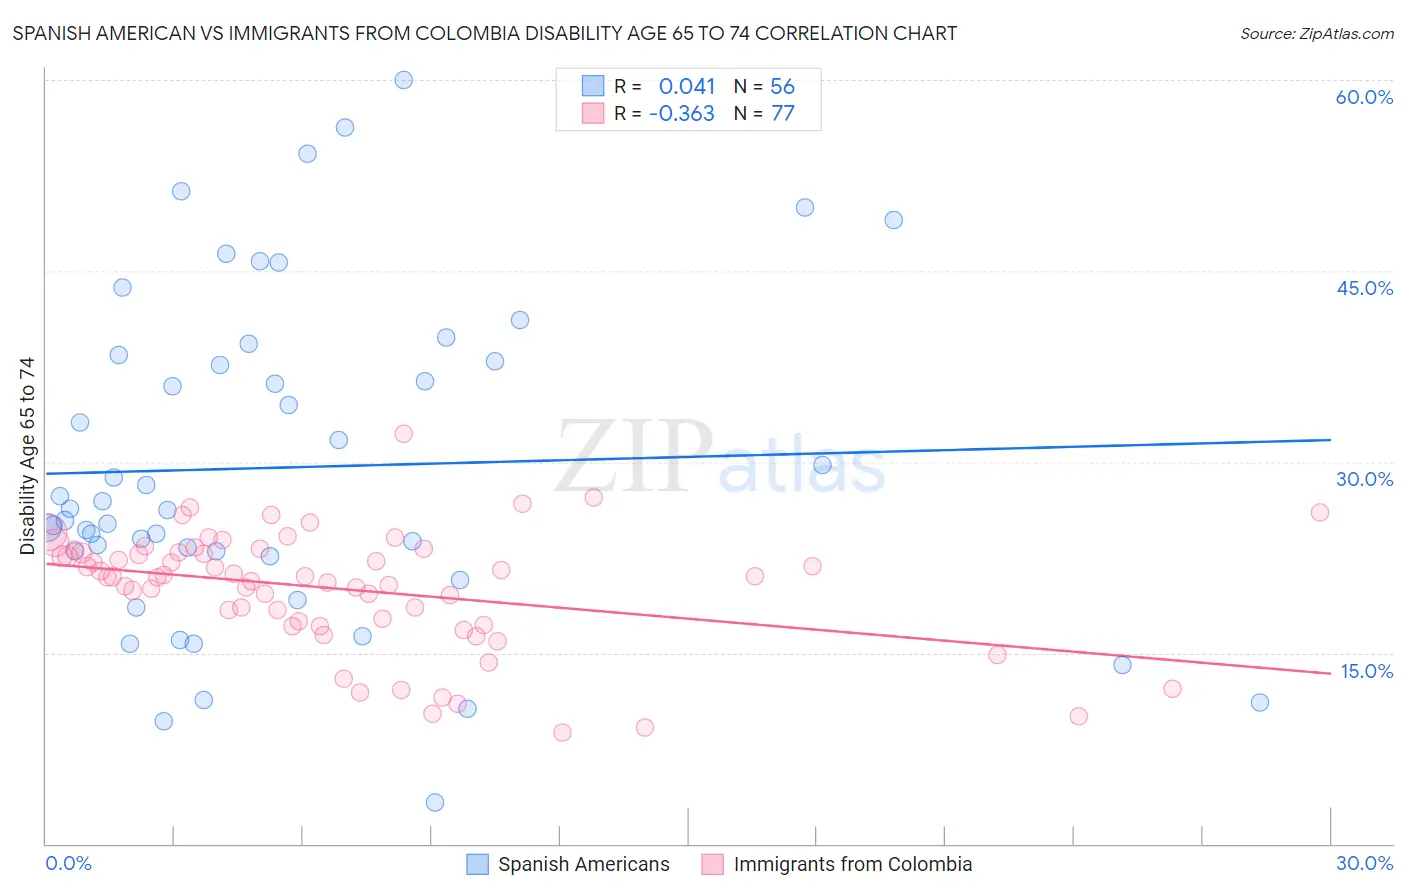 Spanish American vs Immigrants from Colombia Disability Age 65 to 74